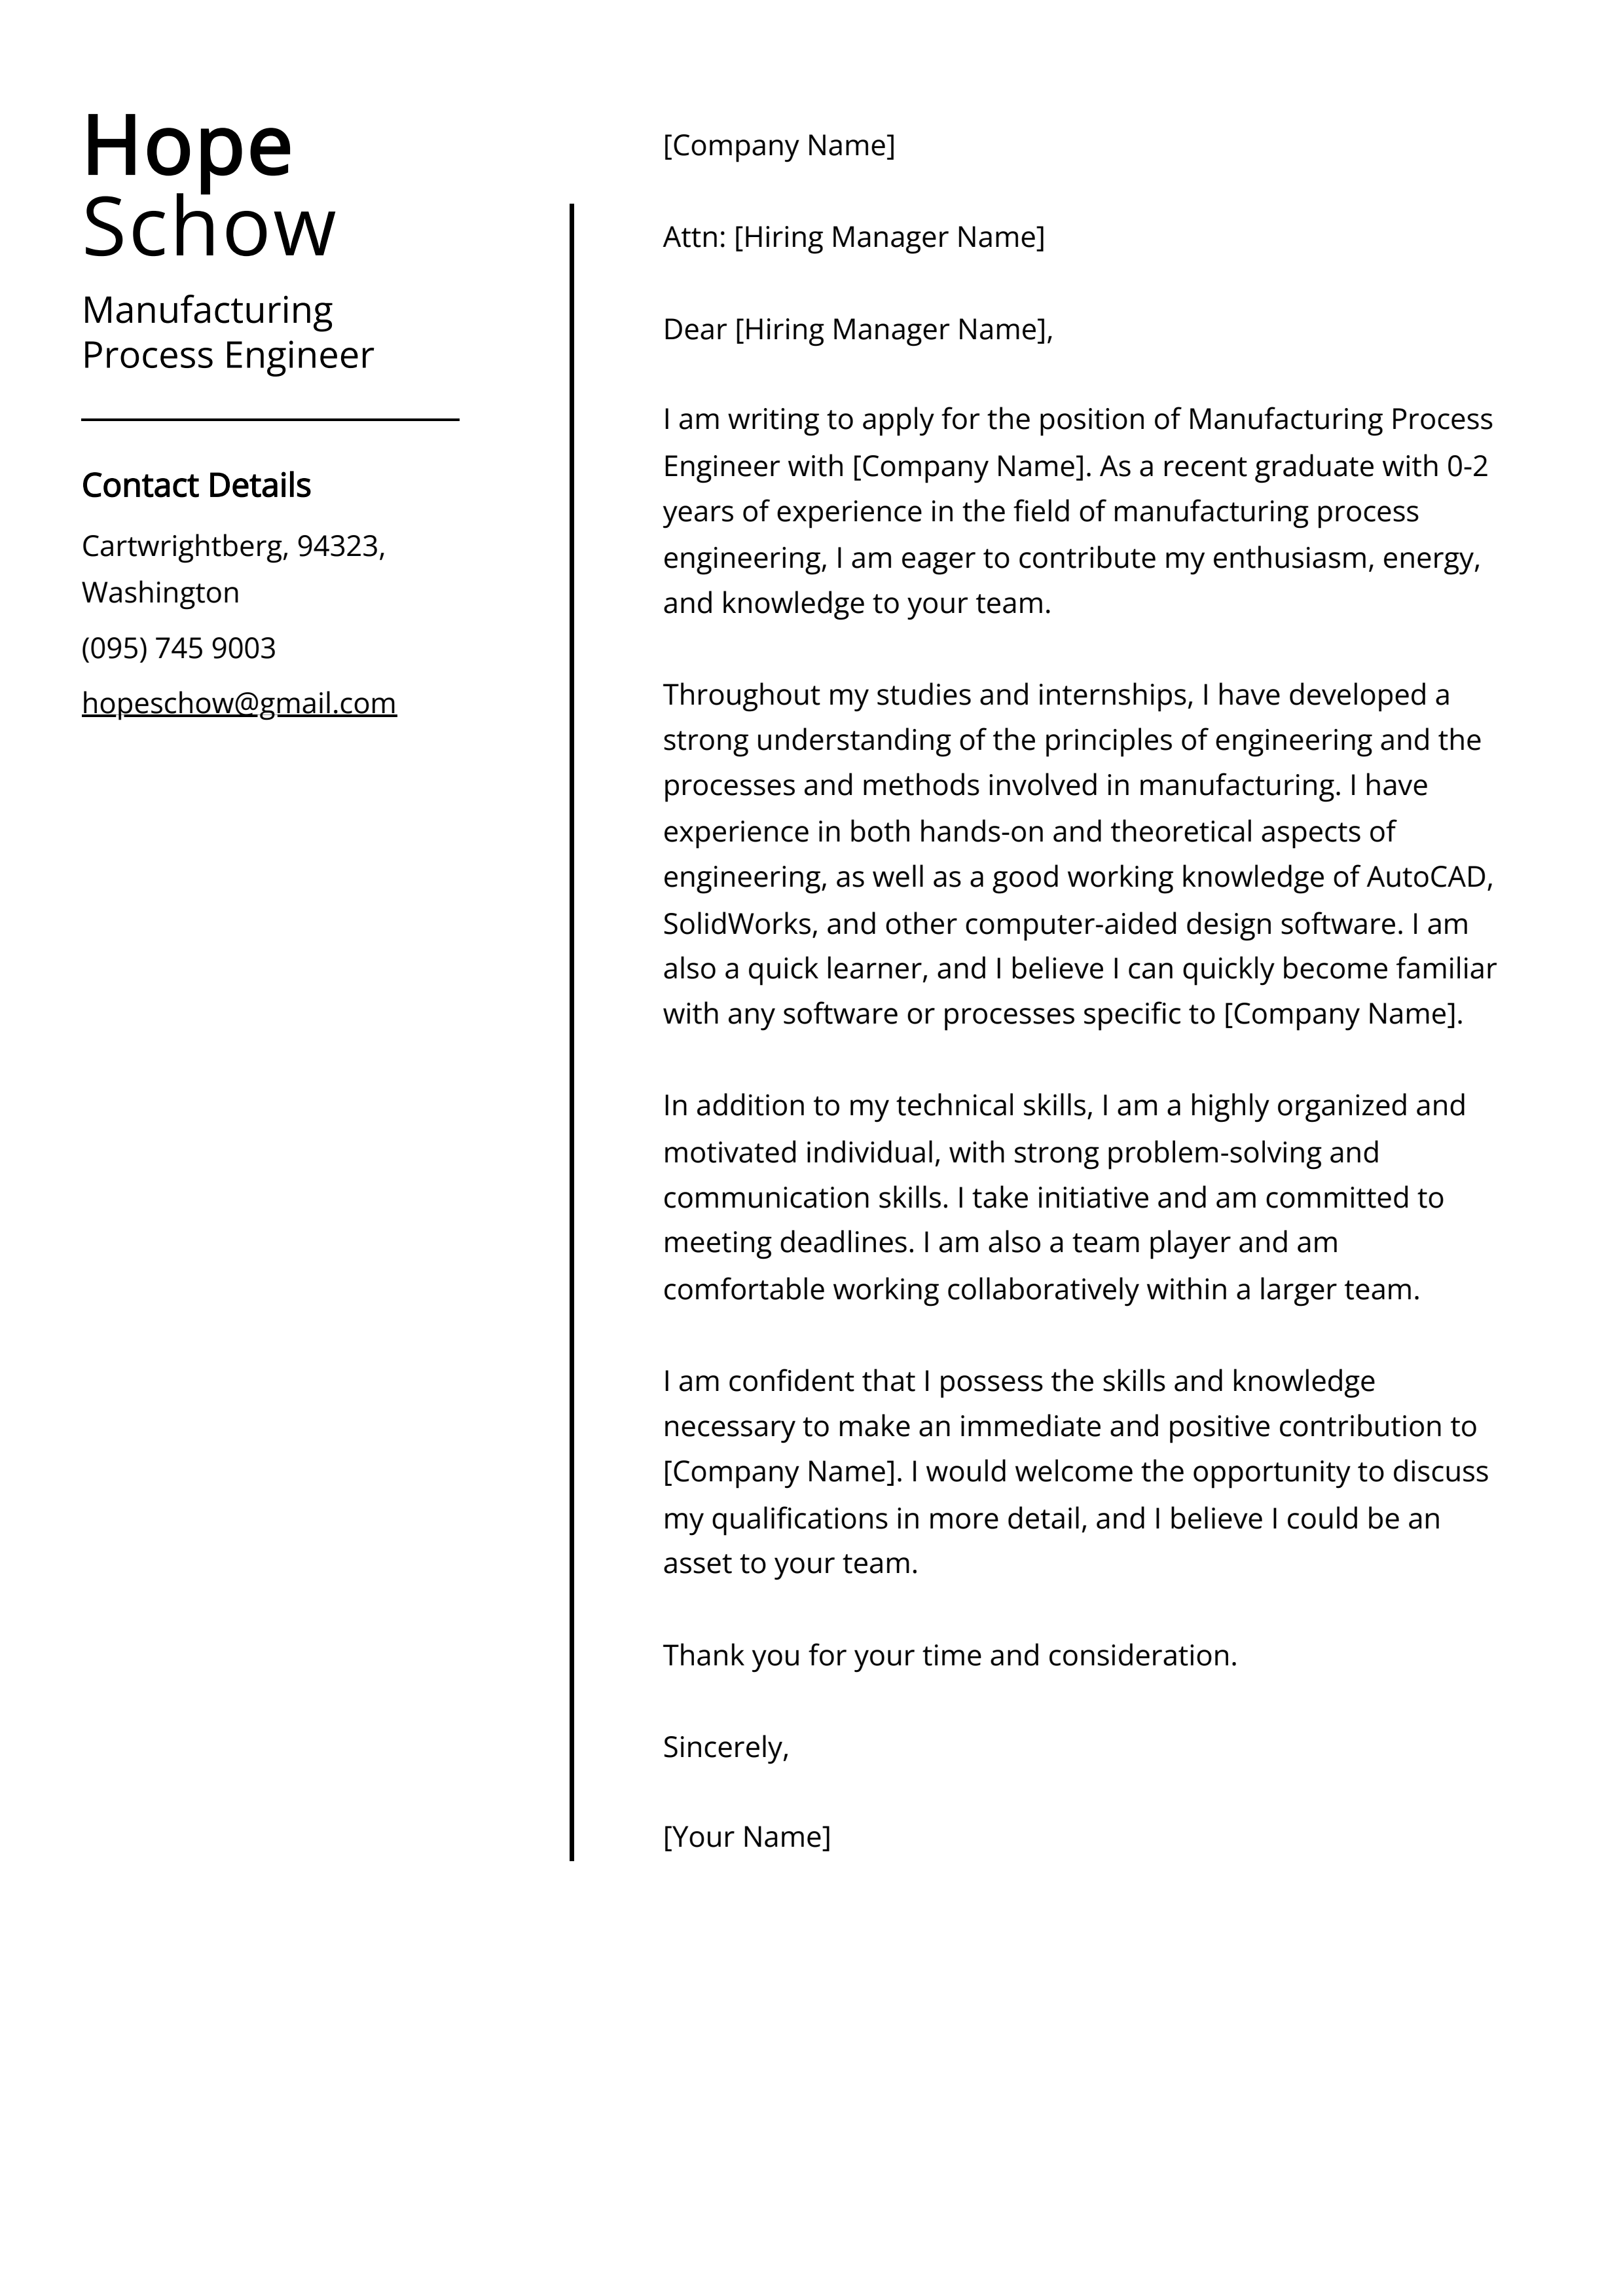 Manufacturing Process Engineer Cover Letter Example